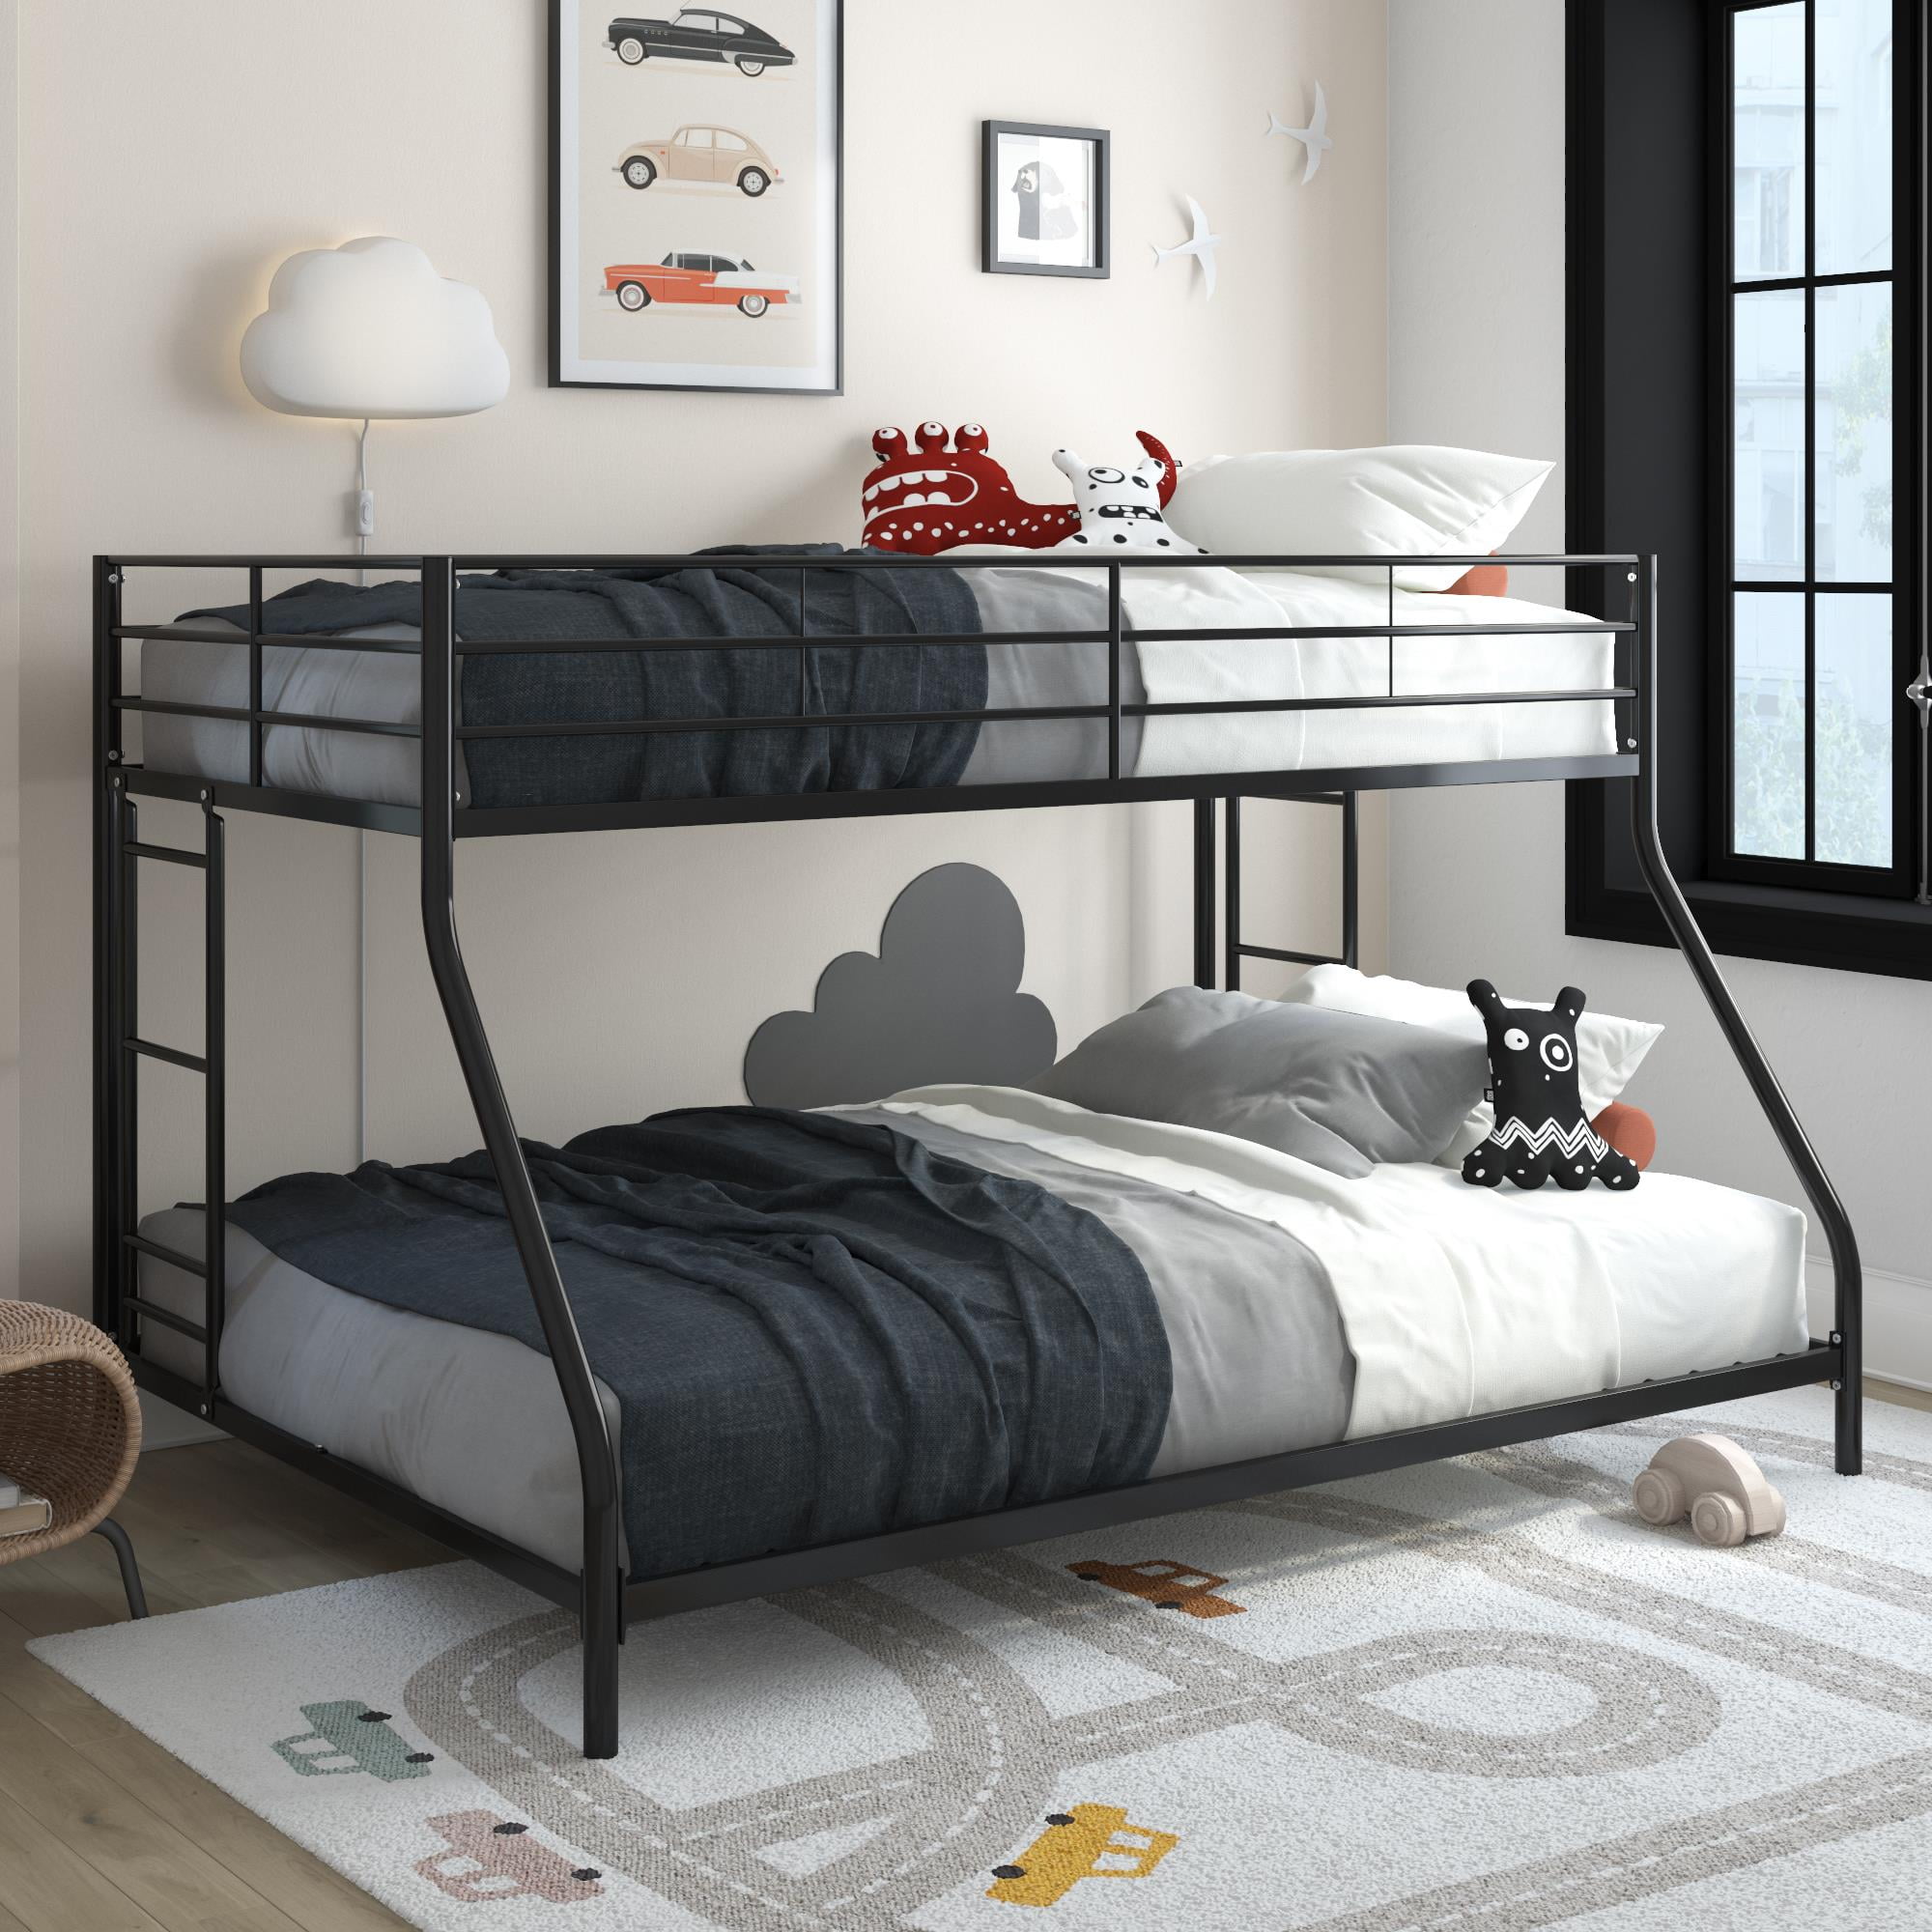 Mainstays Small Space Junior Twin Over, Industrial Bunk Bed Twin Over Full